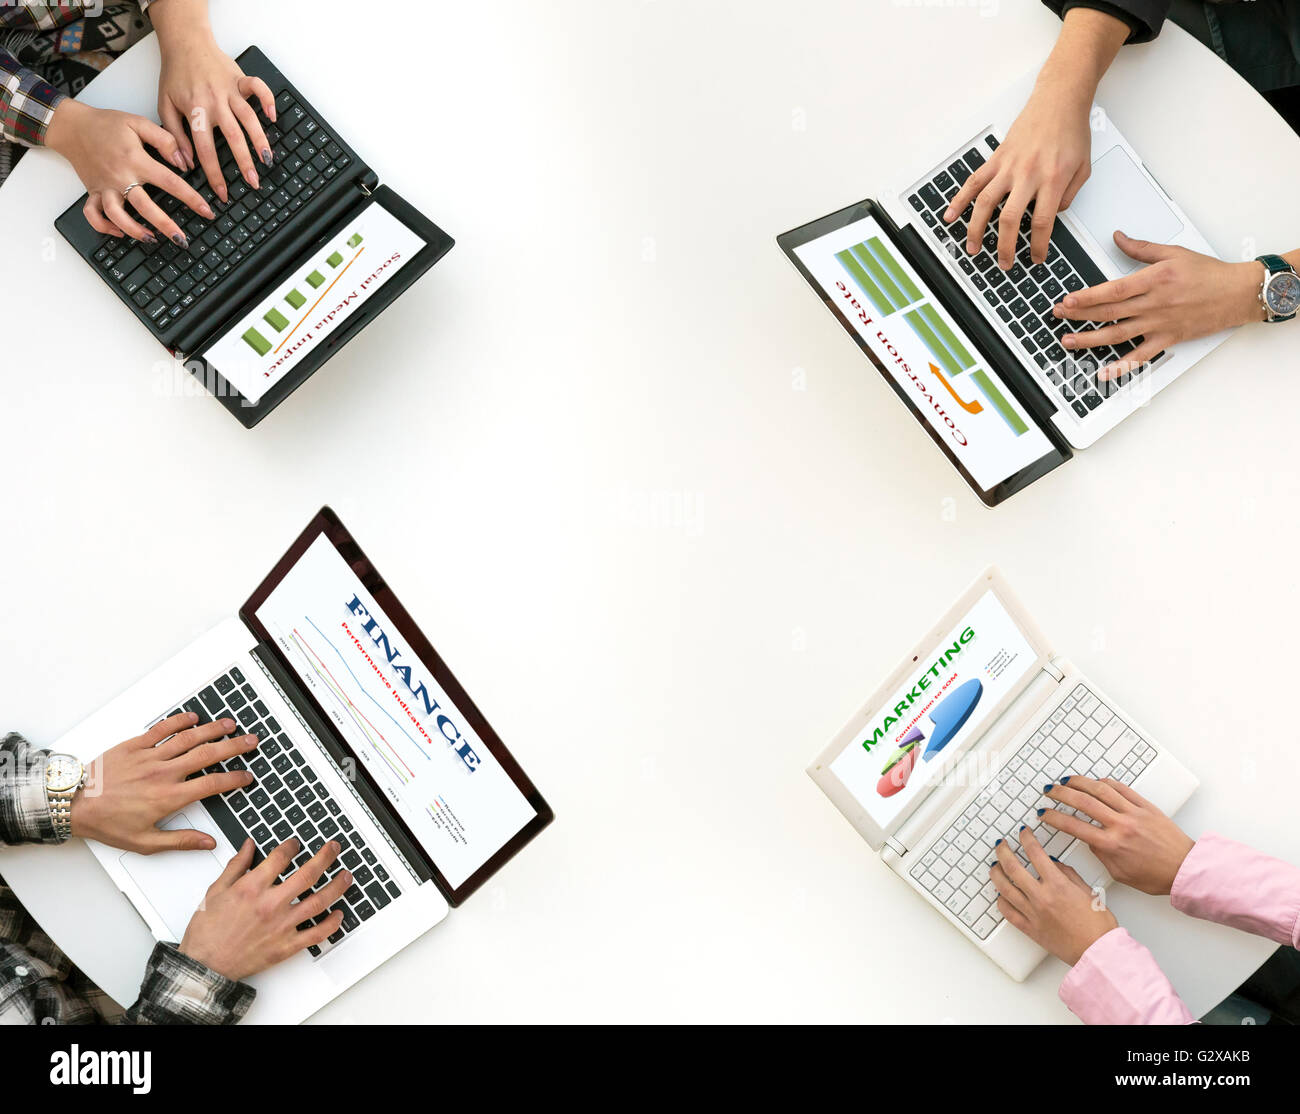 Top View of Rounded Desk with Four Laptops and People Hands Typing on Keyboard Stock Photo